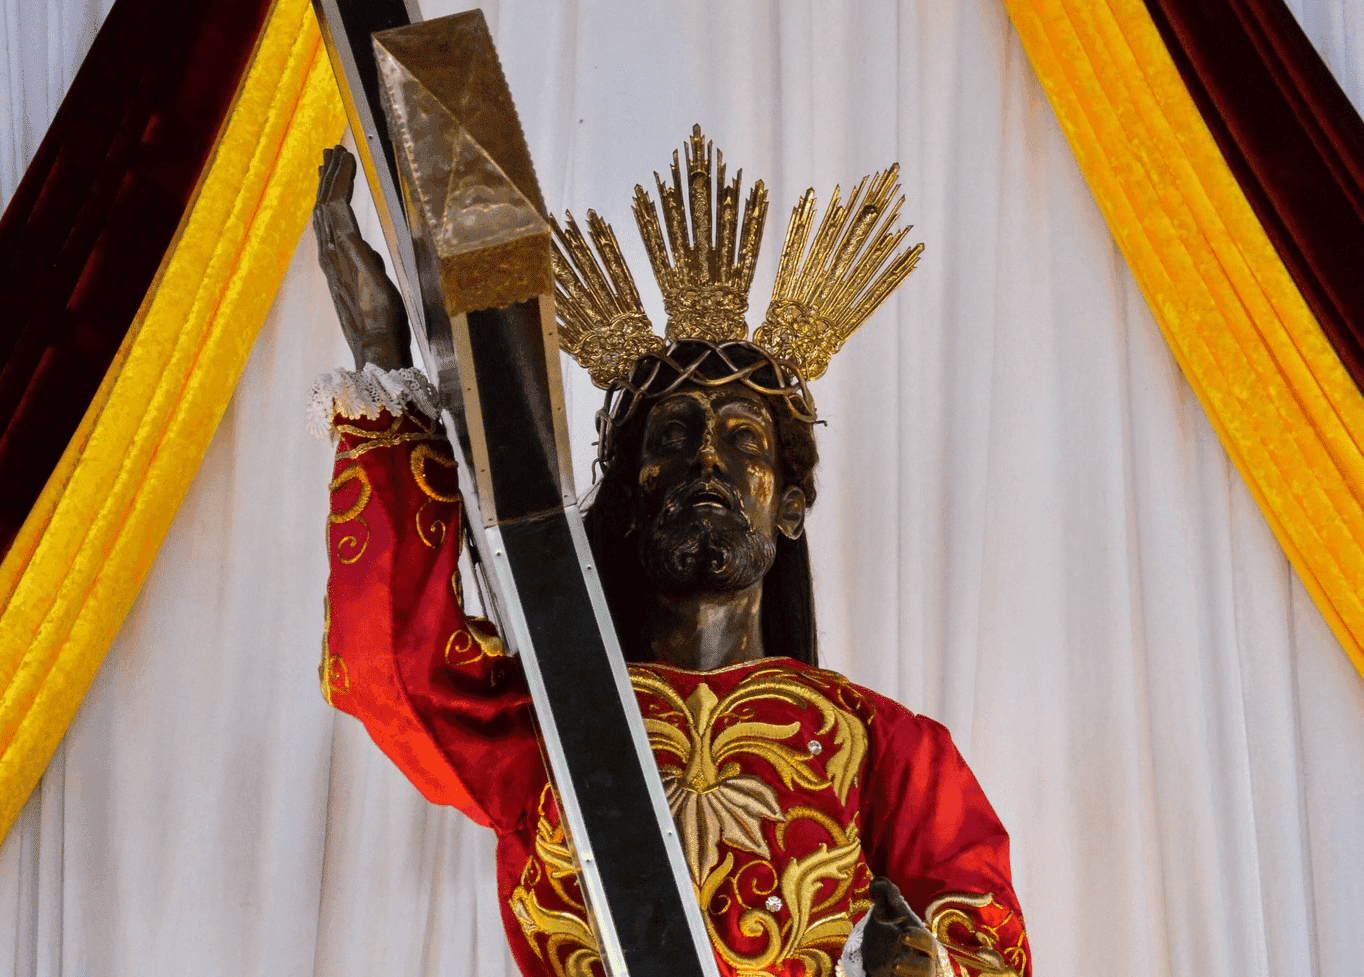 Over 5,000 attendees recorded on second day of Black Nazarene 'Pahalik'